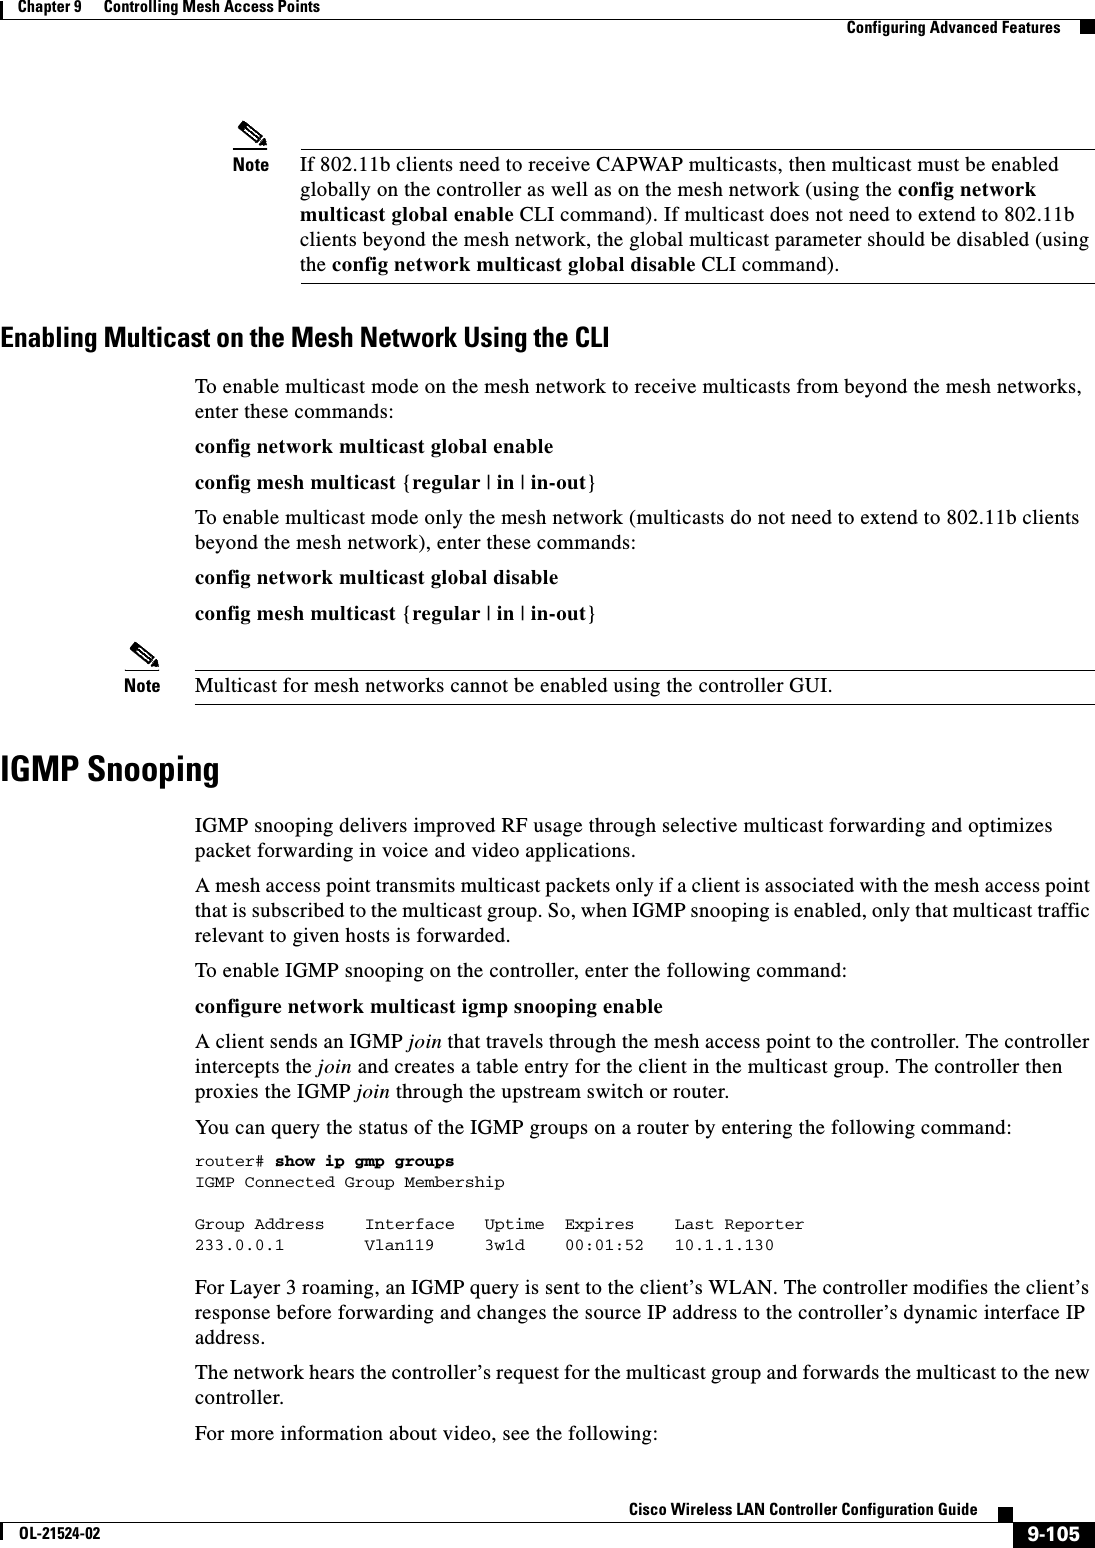  9-105Cisco Wireless LAN Controller Configuration GuideOL-21524-02Chapter 9      Controlling Mesh Access Points  Configuring Advanced FeaturesNote If 802.11b clients need to receive CAPWAP multicasts, then multicast must be enabled globally on the controller as well as on the mesh network (using the config network multicast global enable CLI command). If multicast does not need to extend to 802.11b clients beyond the mesh network, the global multicast parameter should be disabled (using the config network multicast global disable CLI command).Enabling Multicast on the Mesh Network Using the CLITo enable multicast mode on the mesh network to receive multicasts from beyond the mesh networks, enter these commands:config network multicast global enableconfig mesh multicast {regular | in | in-out}To enable multicast mode only the mesh network (multicasts do not need to extend to 802.11b clients beyond the mesh network), enter these commands:config network multicast global disableconfig mesh multicast {regular | in | in-out}Note Multicast for mesh networks cannot be enabled using the controller GUI.IGMP SnoopingIGMP snooping delivers improved RF usage through selective multicast forwarding and optimizes packet forwarding in voice and video applications.A mesh access point transmits multicast packets only if a client is associated with the mesh access point that is subscribed to the multicast group. So, when IGMP snooping is enabled, only that multicast traffic relevant to given hosts is forwarded. To enable IGMP snooping on the controller, enter the following command:configure network multicast igmp snooping enableA client sends an IGMP join that travels through the mesh access point to the controller. The controller intercepts the join and creates a table entry for the client in the multicast group. The controller then proxies the IGMP join through the upstream switch or router.You can query the status of the IGMP groups on a router by entering the following command:router# show ip gmp groupsIGMP Connected Group MembershipGroup Address    Interface   Uptime  Expires    Last Reporter233.0.0.1        Vlan119     3w1d    00:01:52   10.1.1.130For Layer 3 roaming, an IGMP query is sent to the client’s WLAN. The controller modifies the client’s response before forwarding and changes the source IP address to the controller’s dynamic interface IP address.The network hears the controller’s request for the multicast group and forwards the multicast to the new controller.For more information about video, see the following: